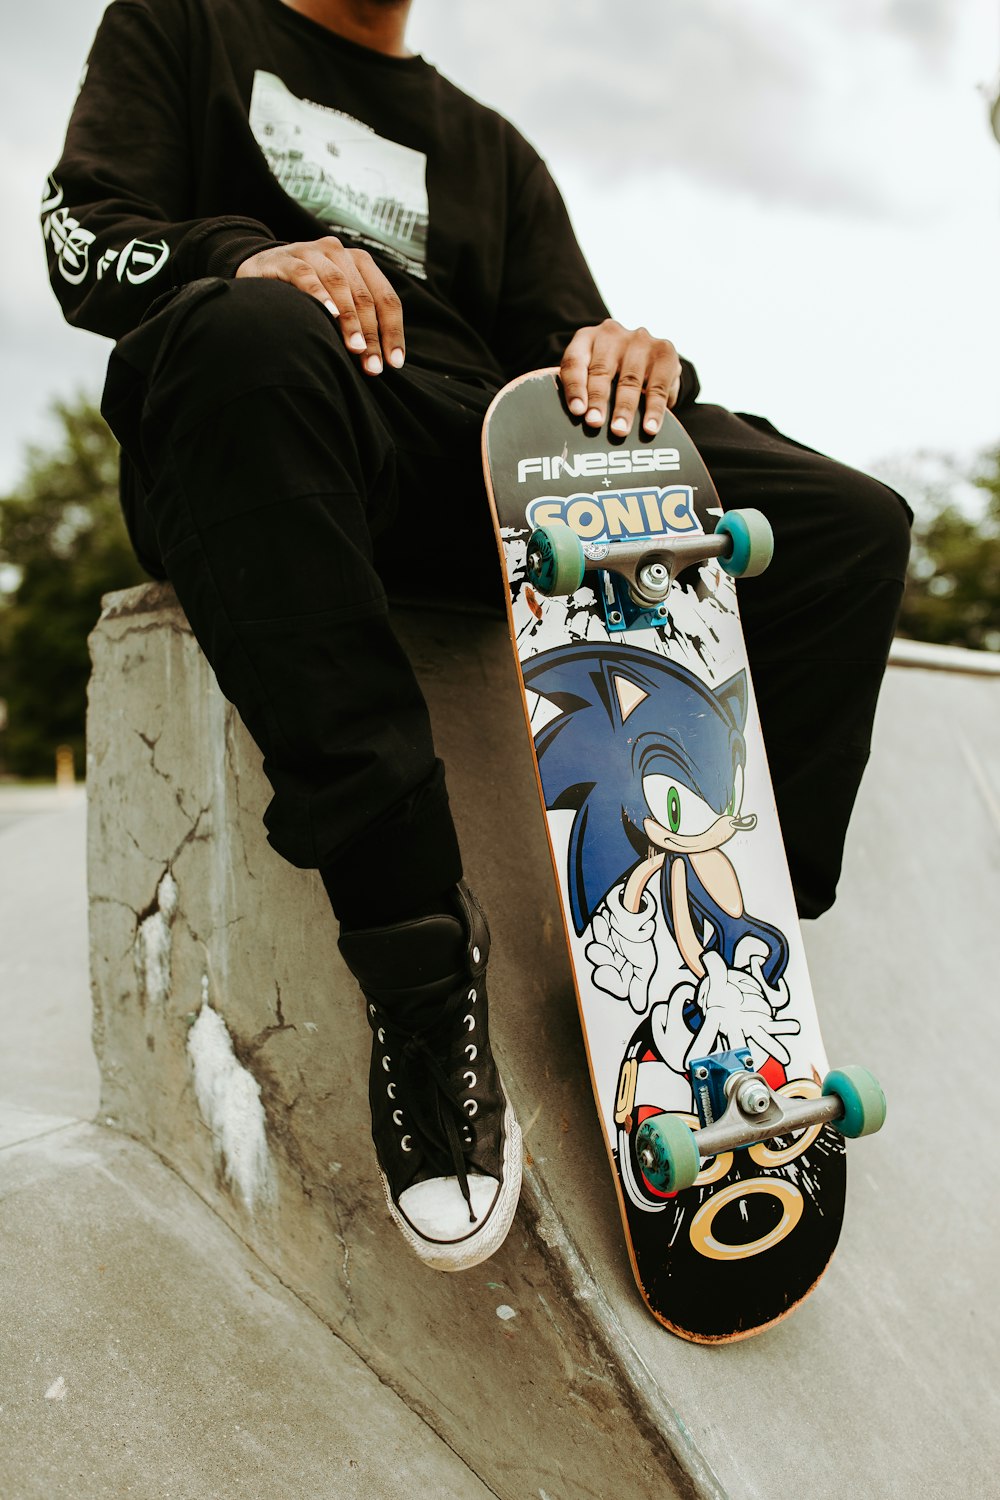 person wearing black long-sleeved shirt holding Finesse Sonic skateboard